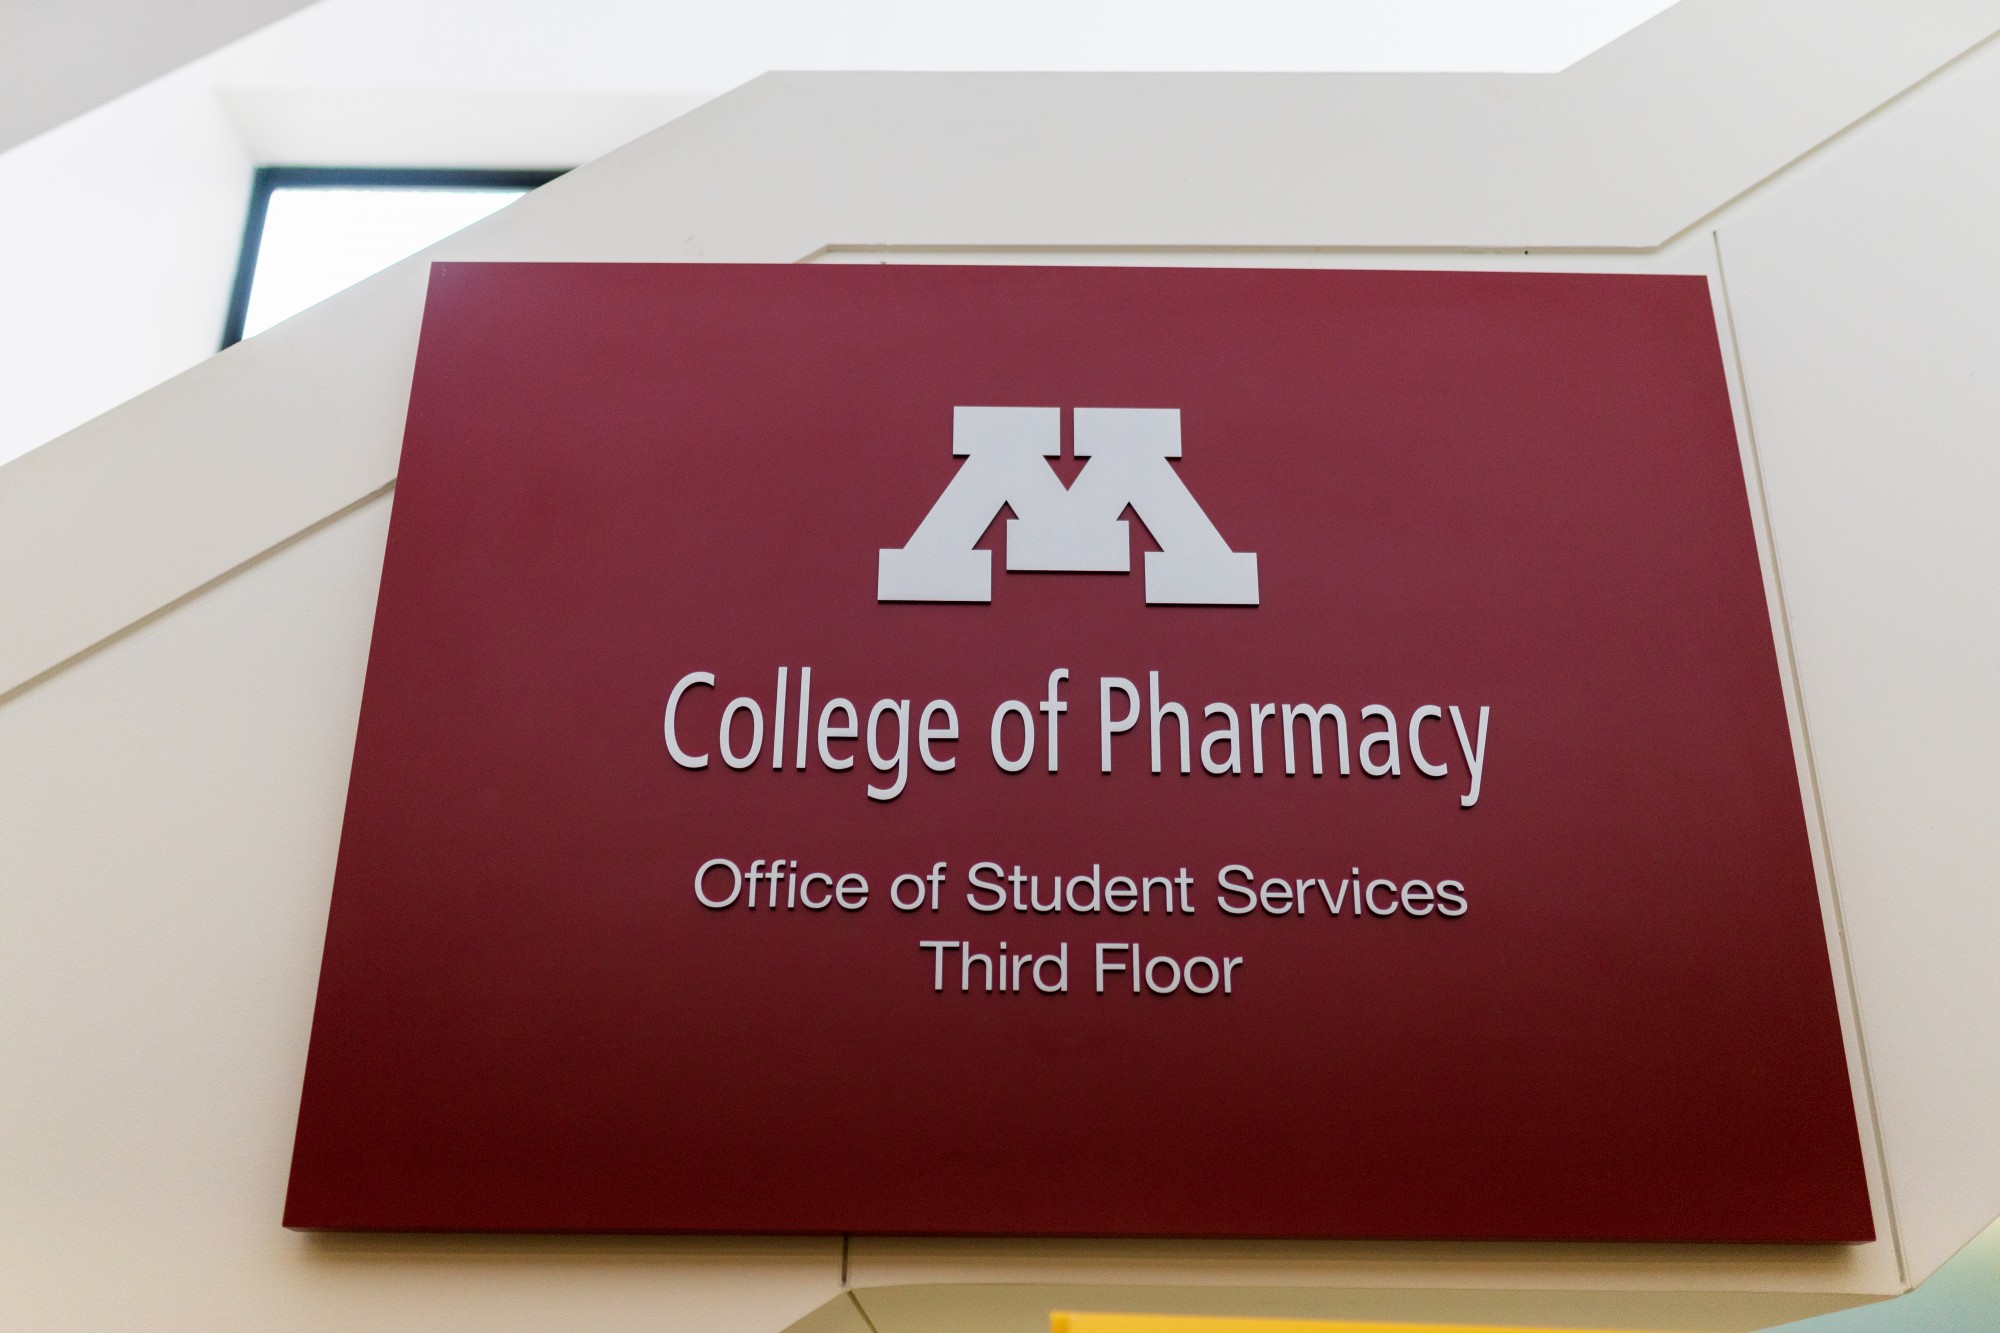  The University of Minnesota College of Pharmacy in Weaver Deansford Hall on Sunday, Feb. 16.  Contributions from the College led to the development of VALTOCO, a new drug treatment for epilepsy. 